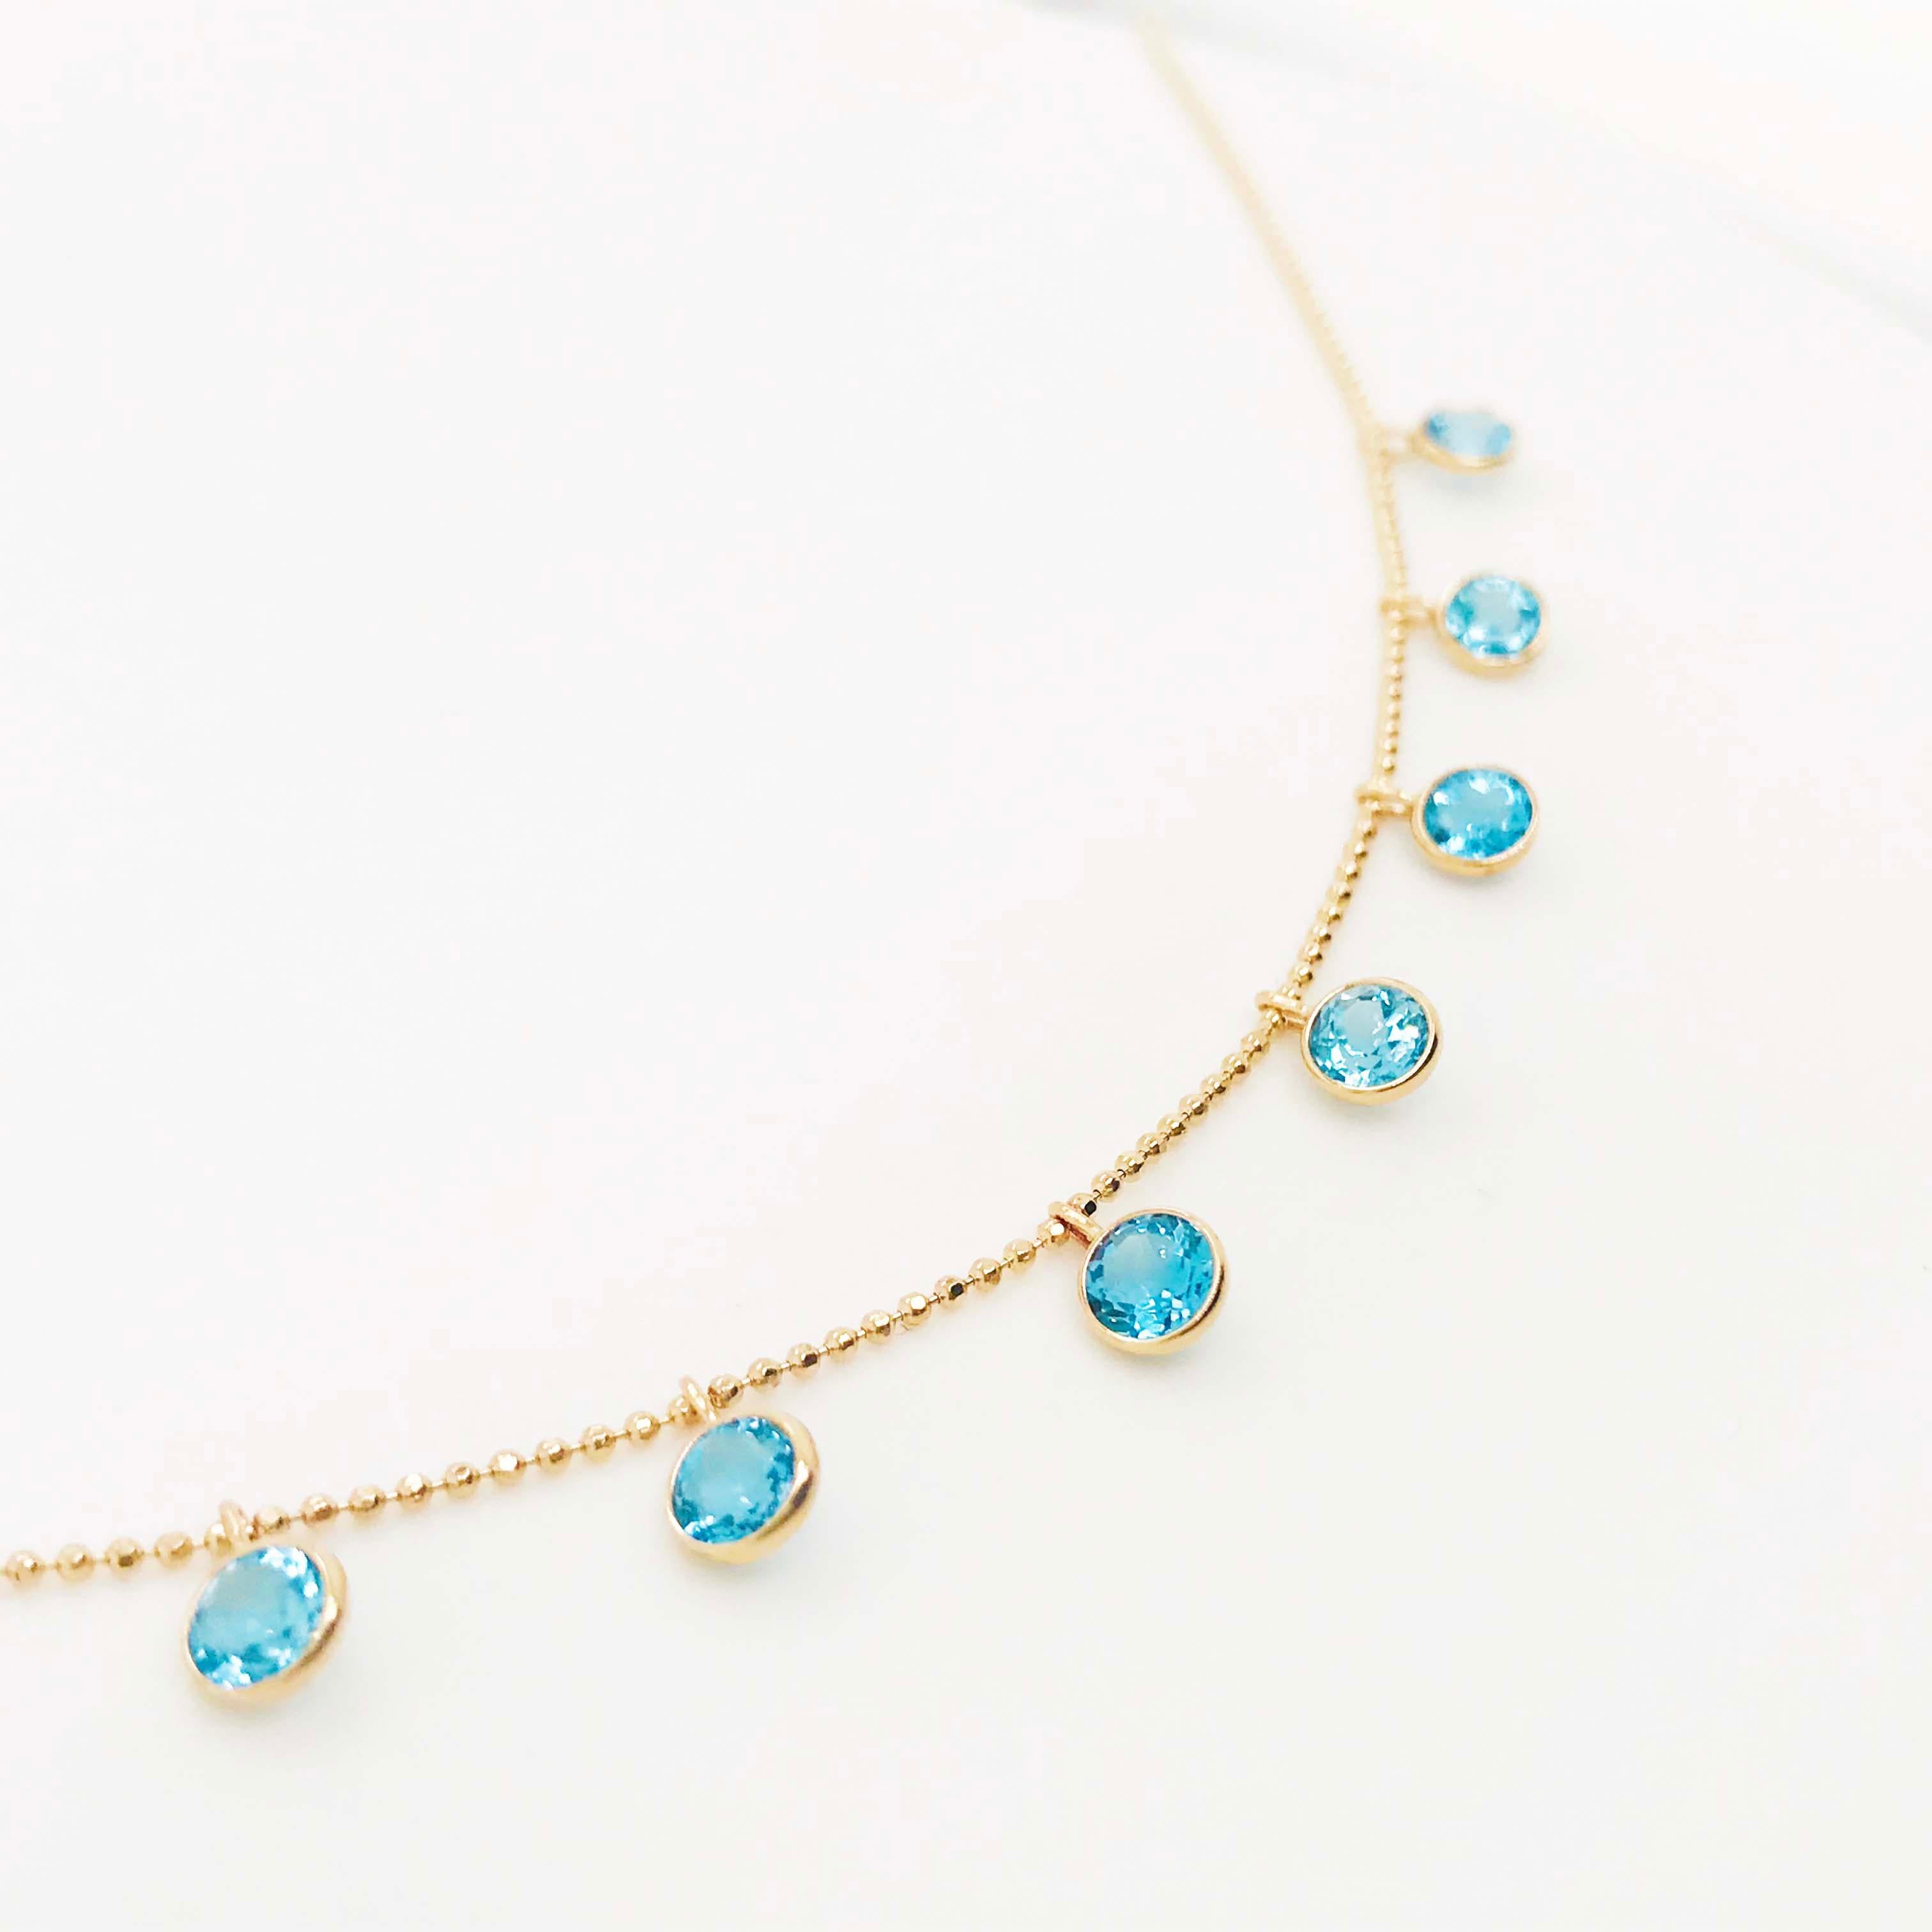 Adorable blue topaz gemstone charm necklace! This necklace is a modern design with 9 round blue topaz gemstones weighing 2.25 carats total weight and set in gold bezels that dangle on a gold beaded chain. The bezel charms are evenly spaced along the